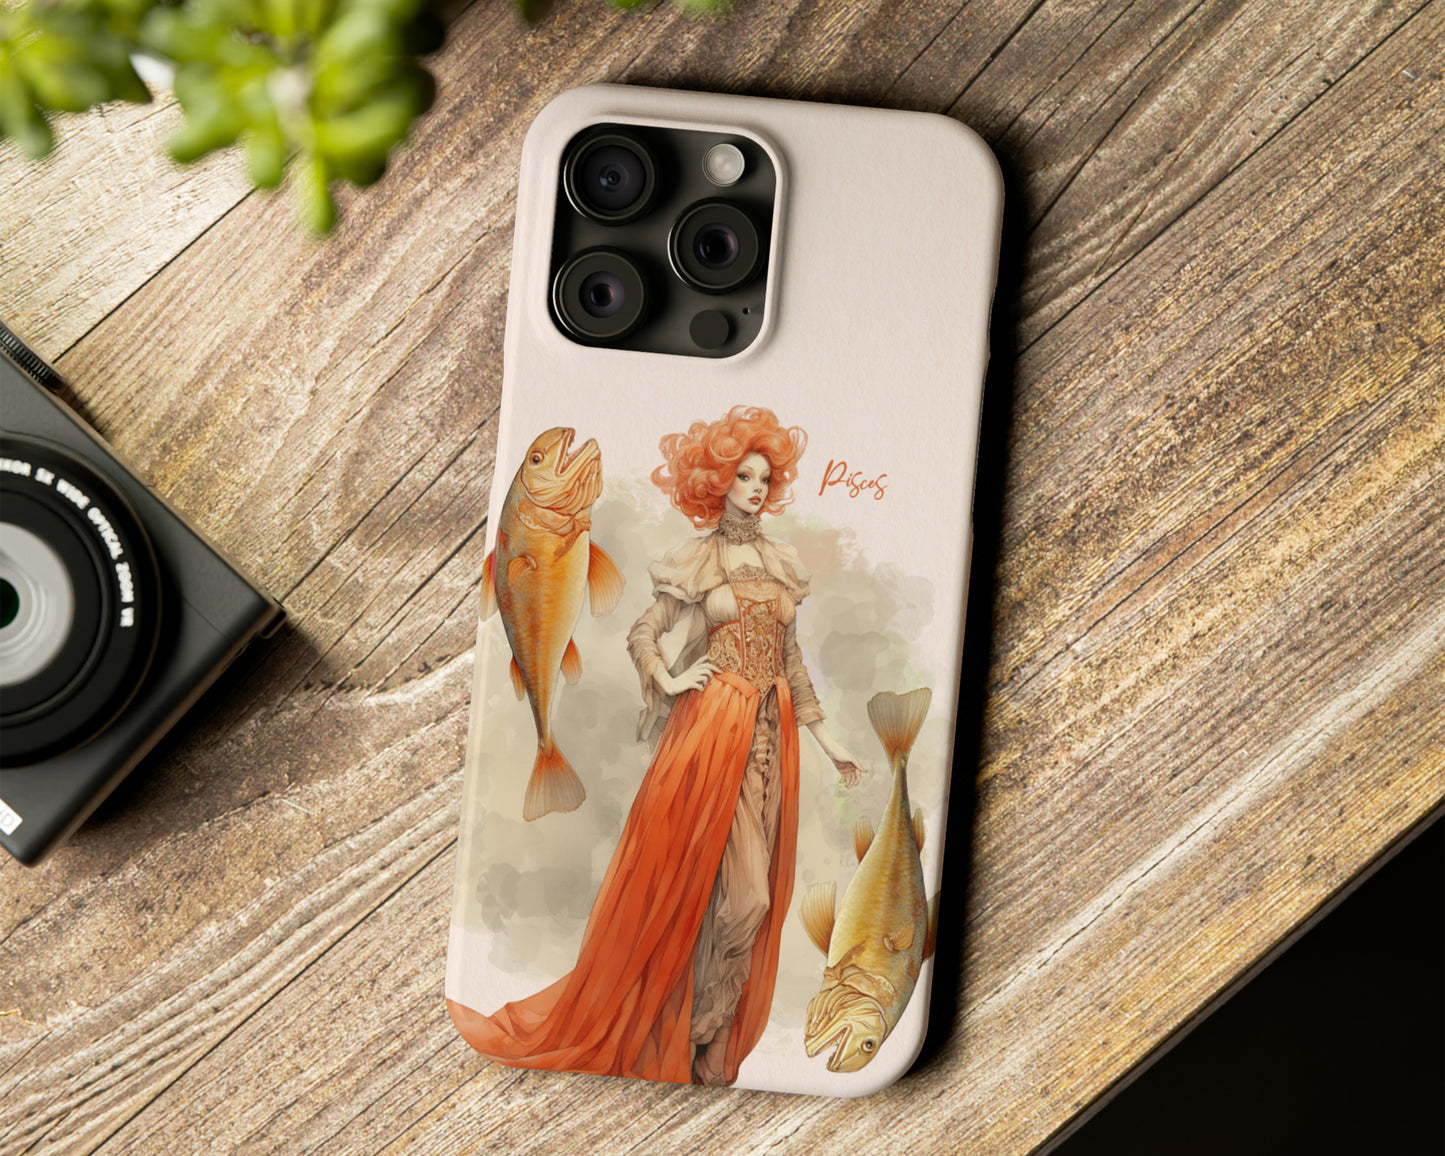 Pisces Zodiac sign watercolor Goddess iPhone case